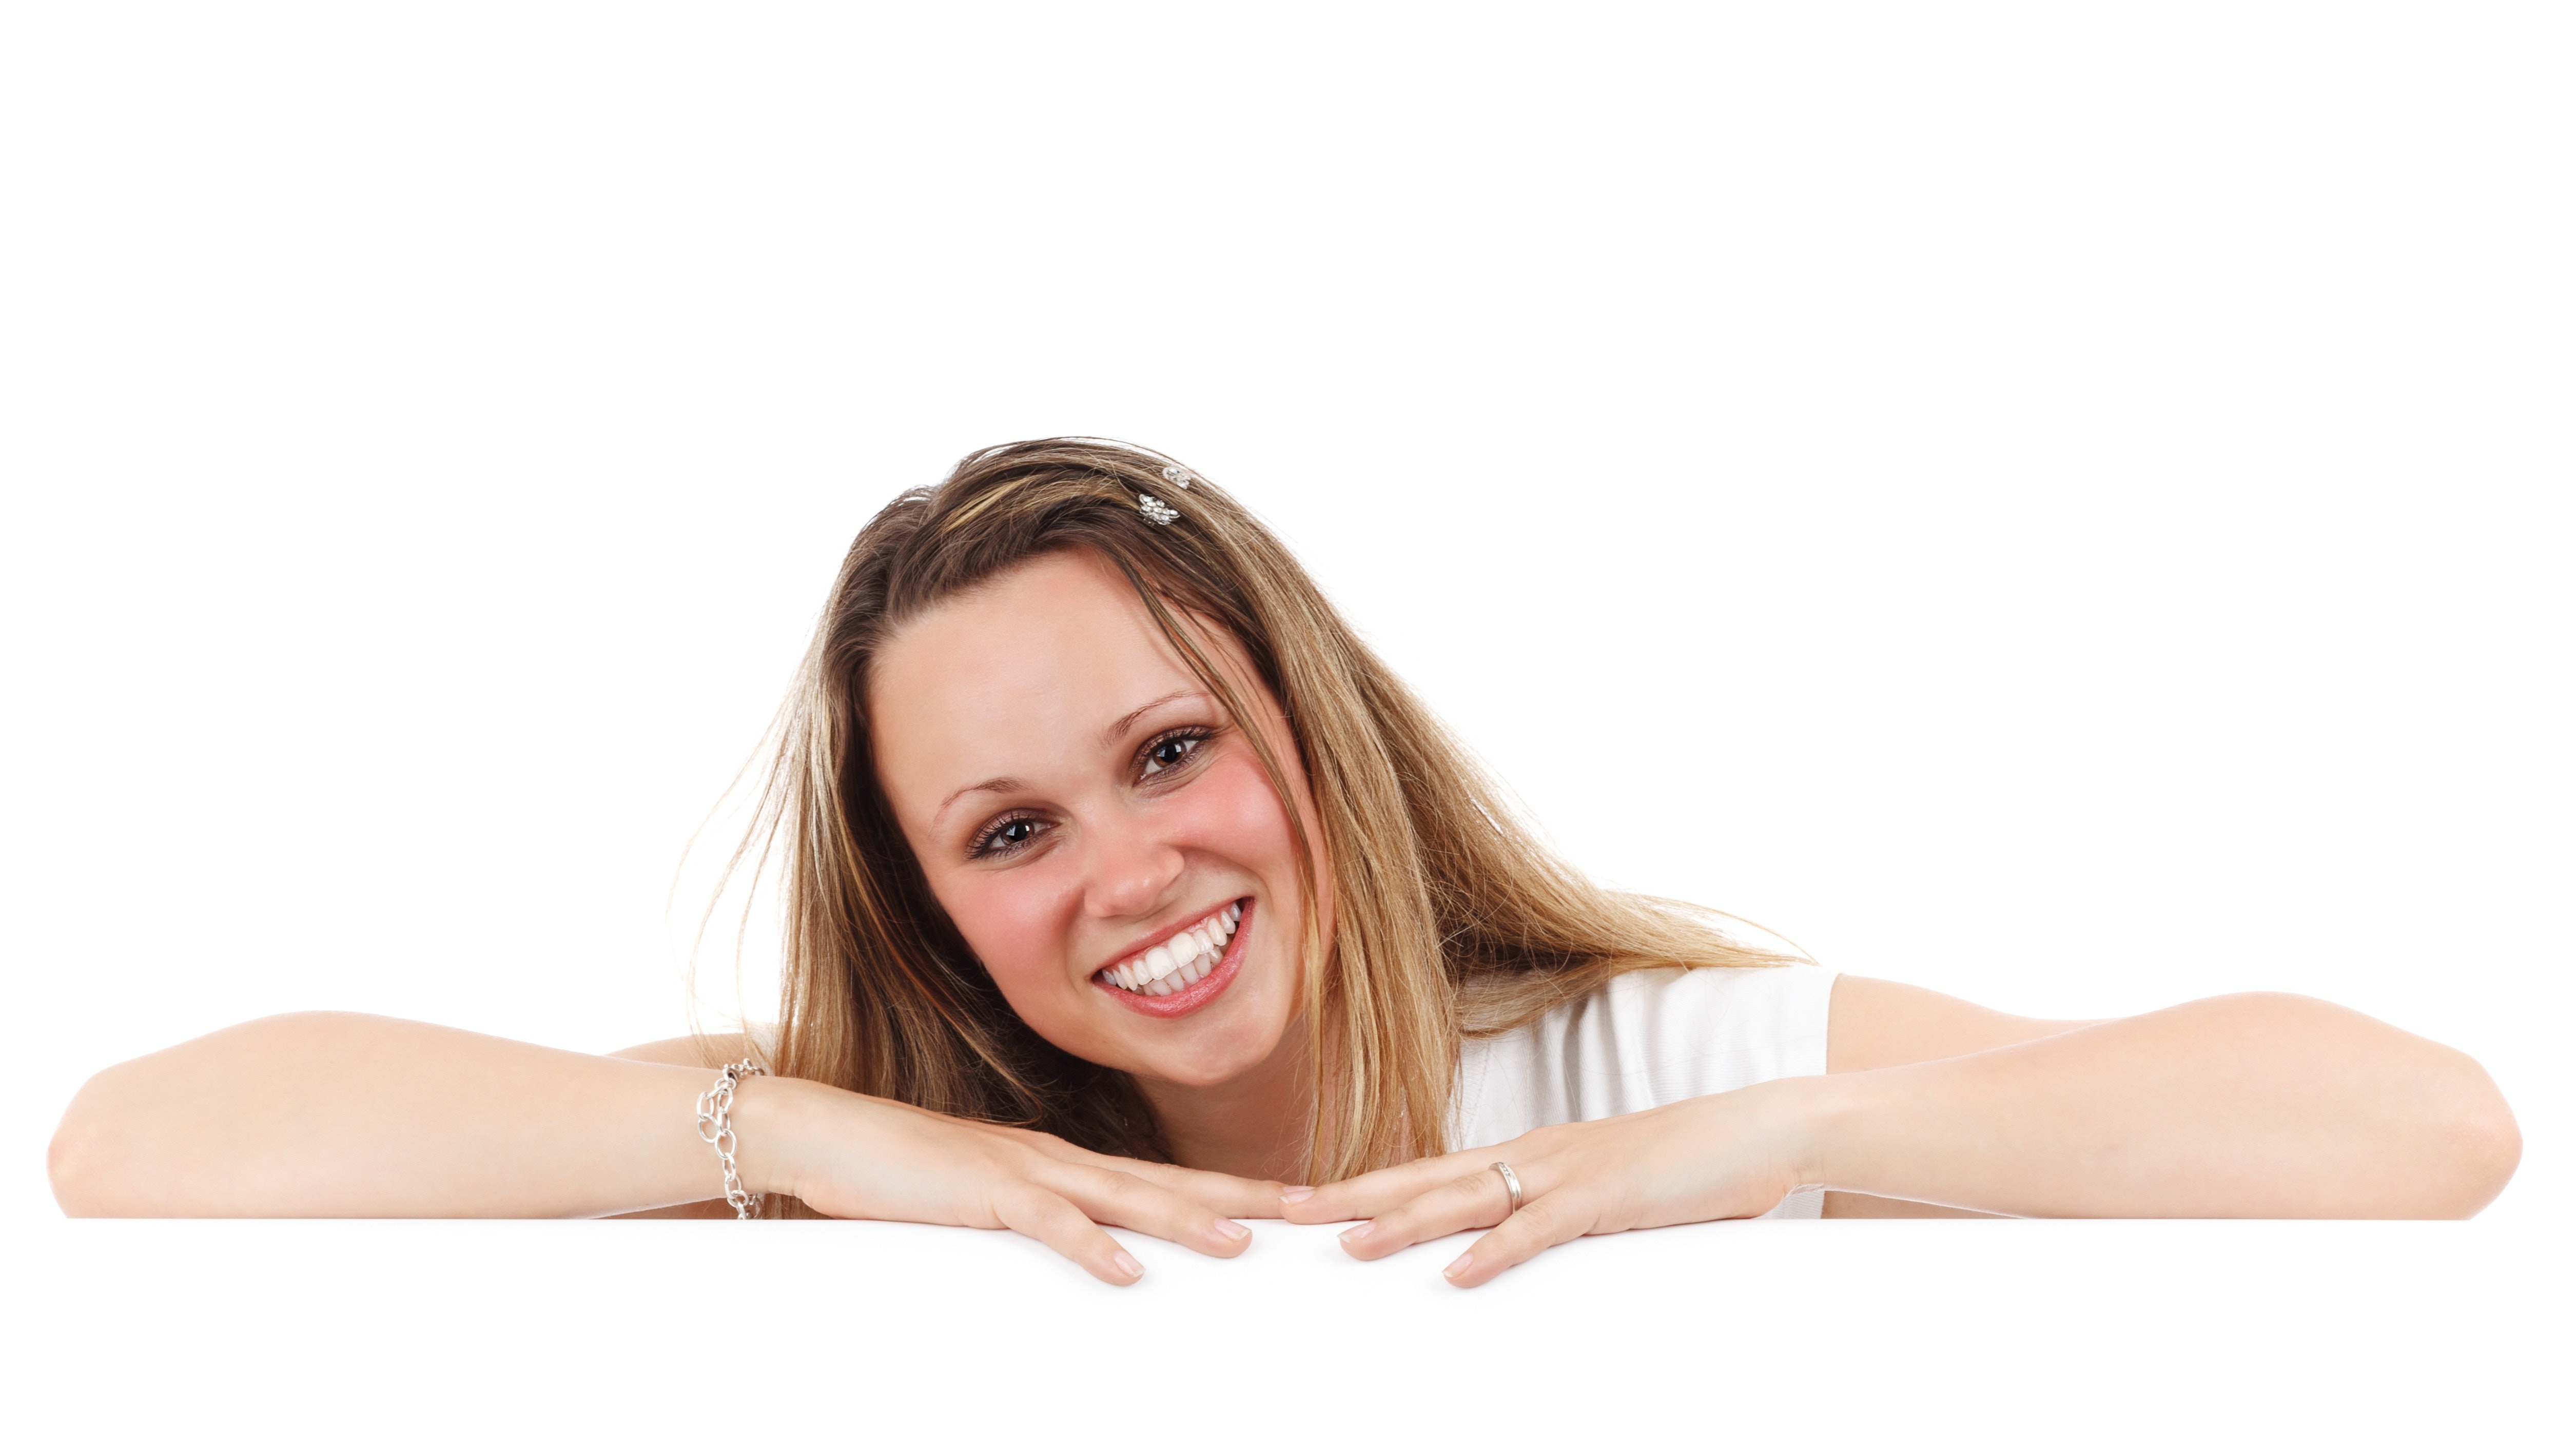 Woman in white t shirt smiling photo